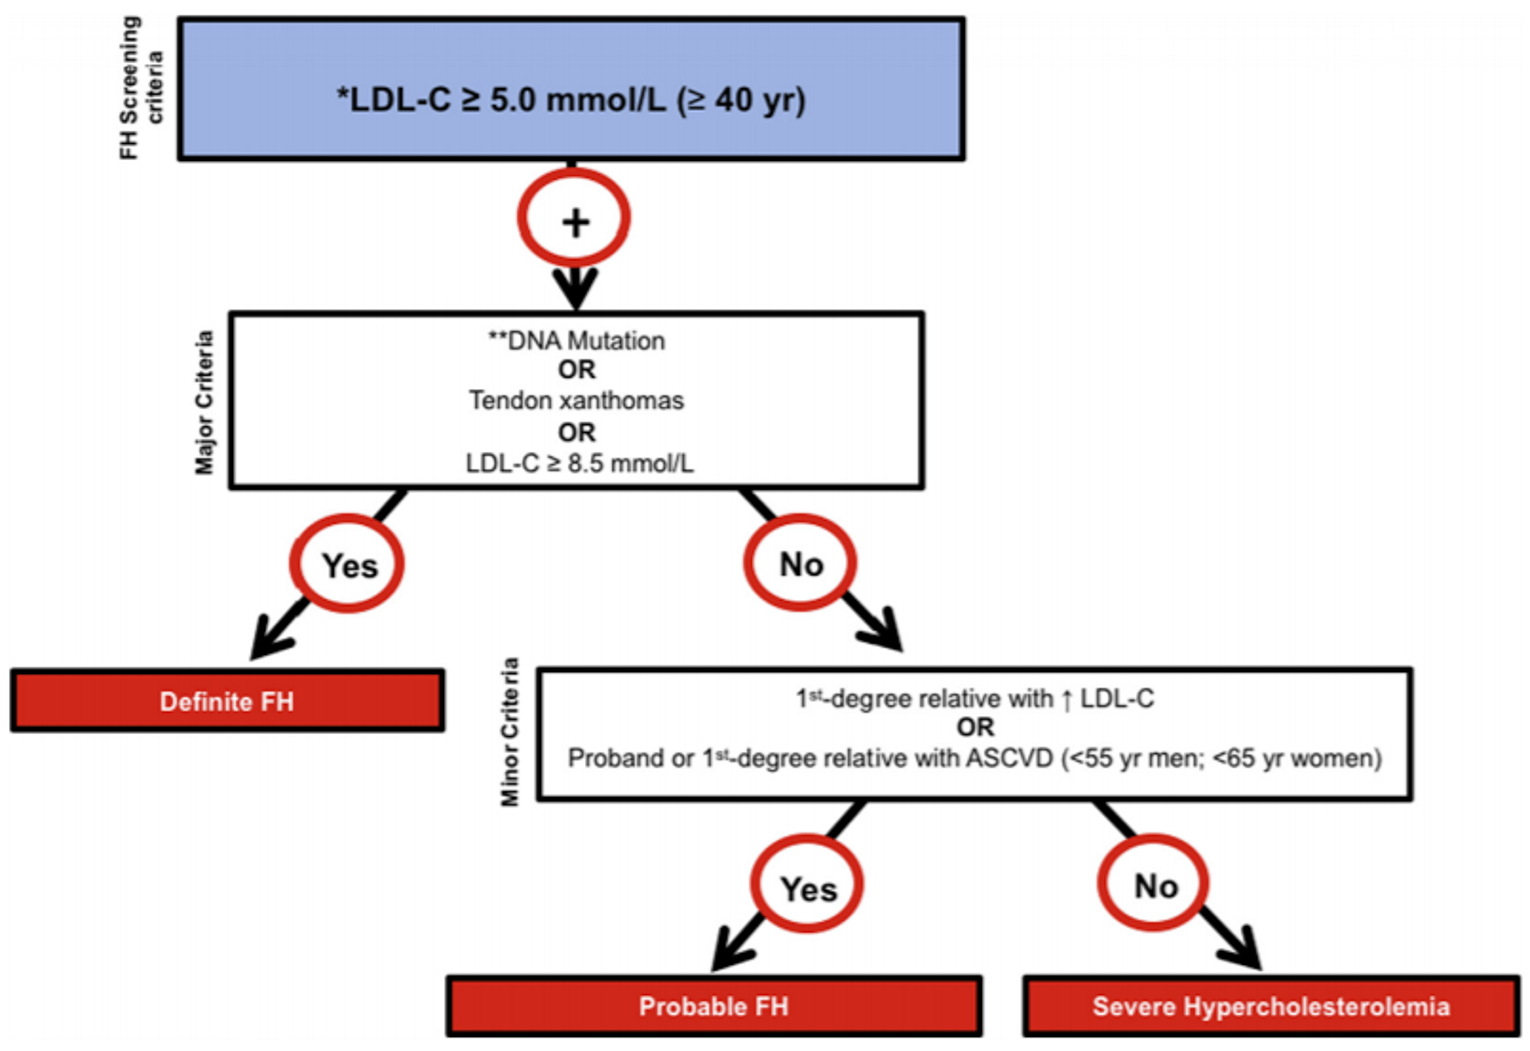 Flow chart for defining FH in Canada. Screening criteria consist of having a LDL-C greater than or equal to 5.0 mmol/L with major criteria of DNA mutation, tendon xanthomas, or LDL-C greater than or equal to 8.5 mmol/L comprising definite FH. Having a 1st-degree relative with elevated LDL-C or proband or a 1st-degree relative with ASCVD results in probable FH. If these criteria are not met, a diagnosis of severe hypercholesterolemia is considered.